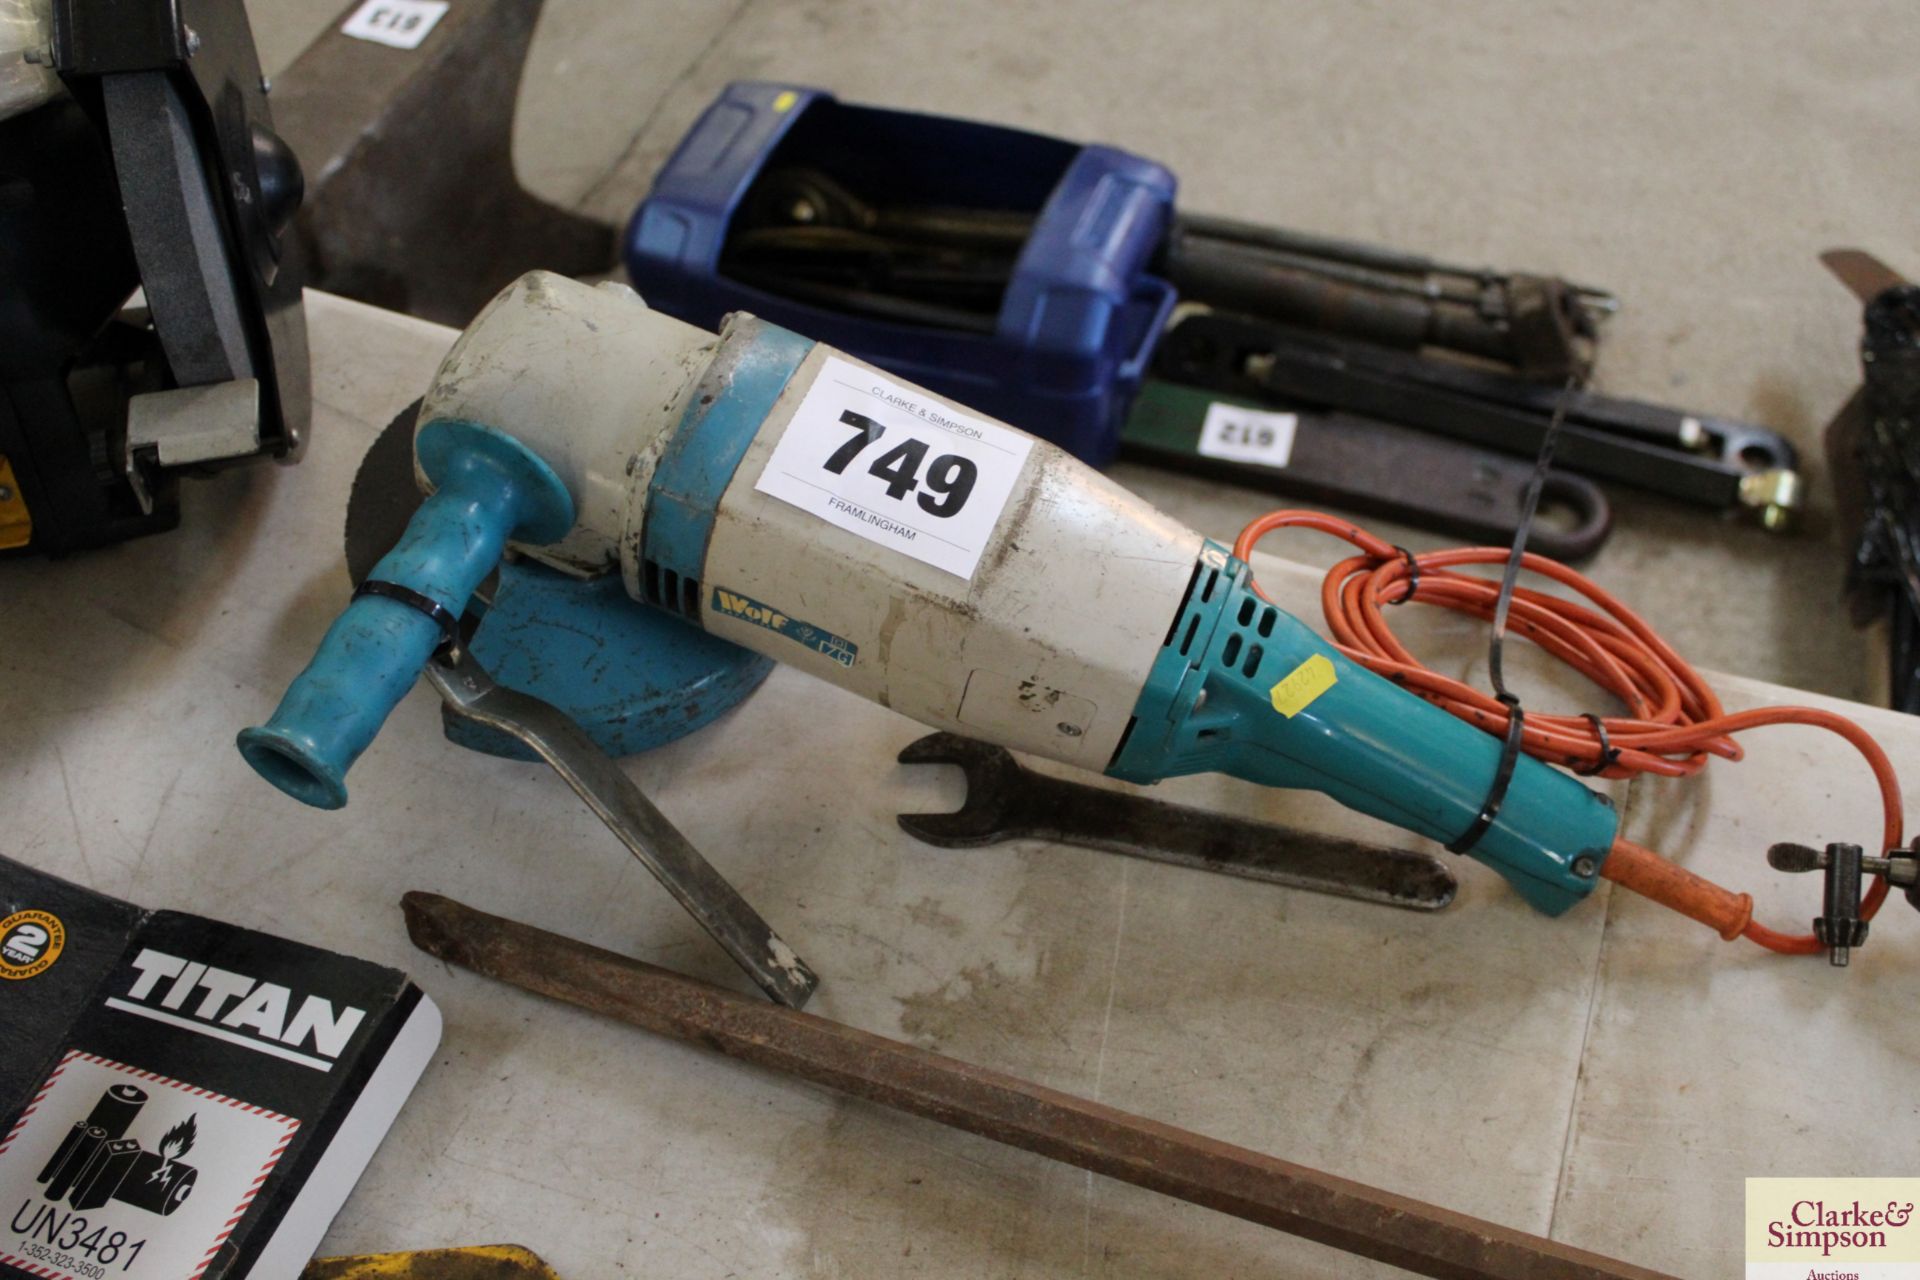 7in Wolf angle grinder.